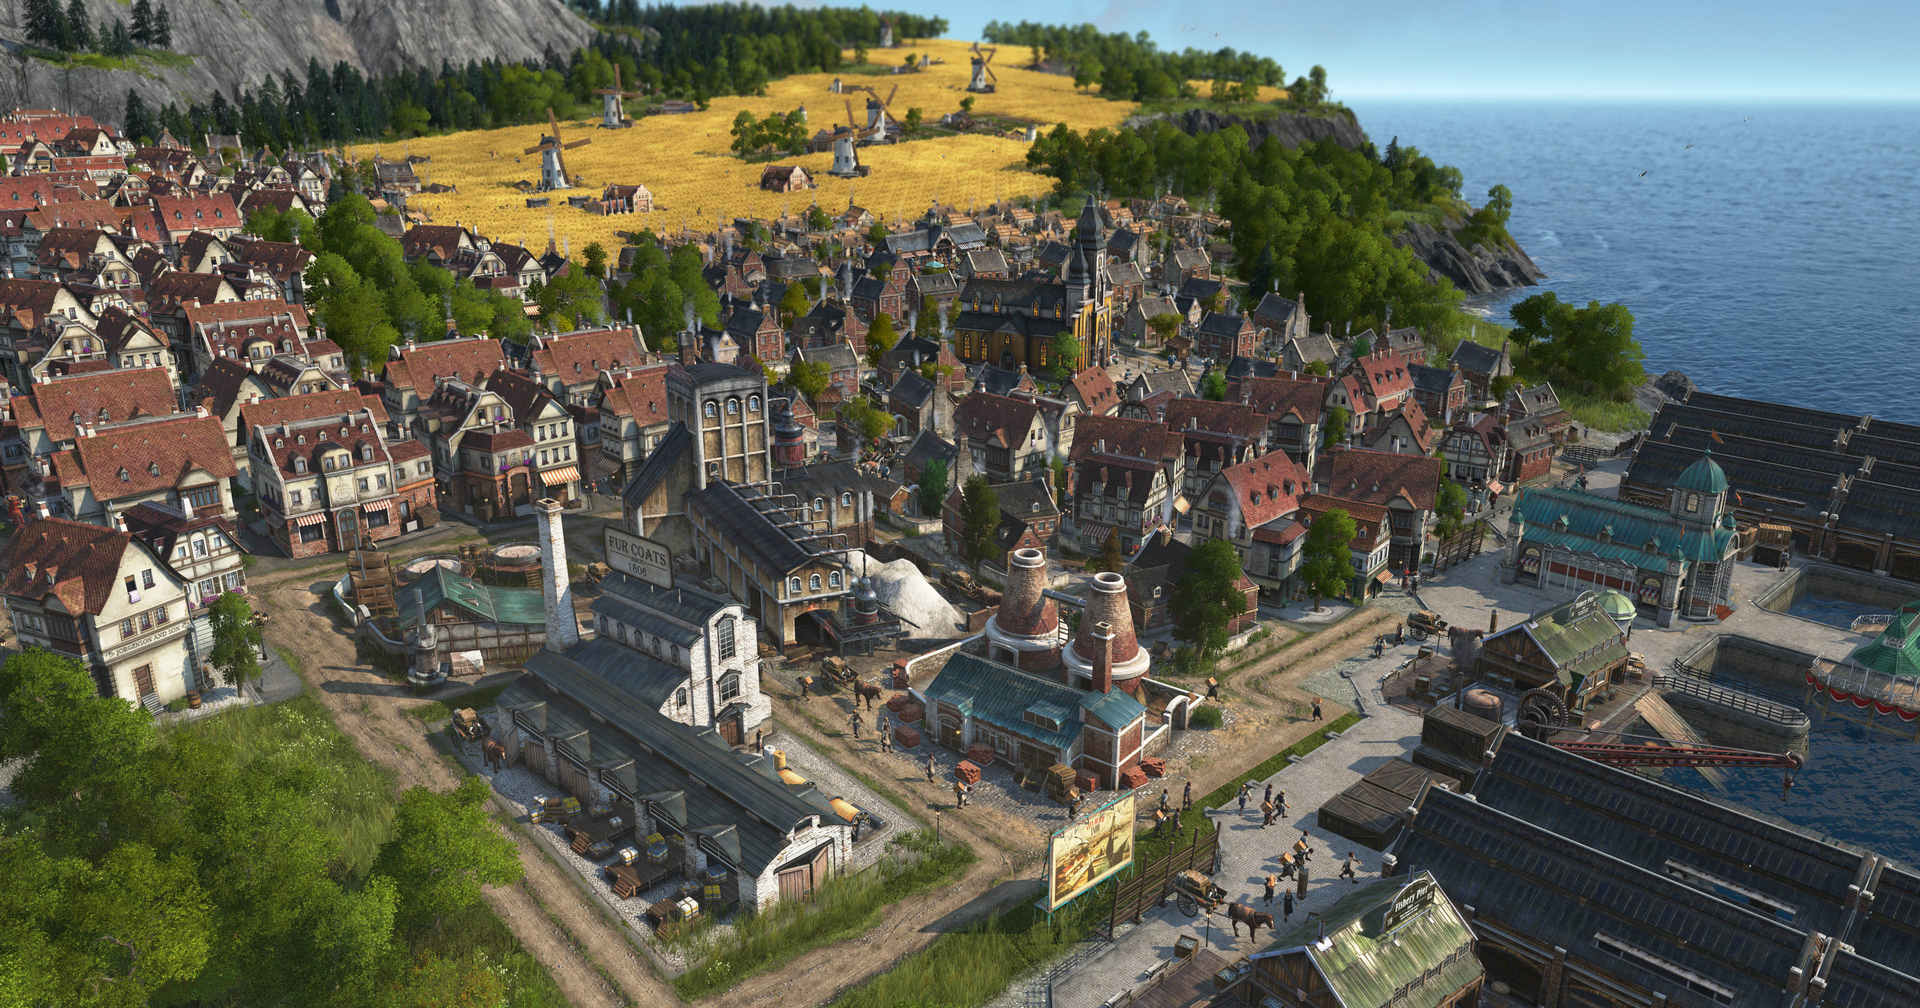 With the help of many mods, you can make Anno 1800 an even greater experience on Steam. Here we see a thriving metropolis.